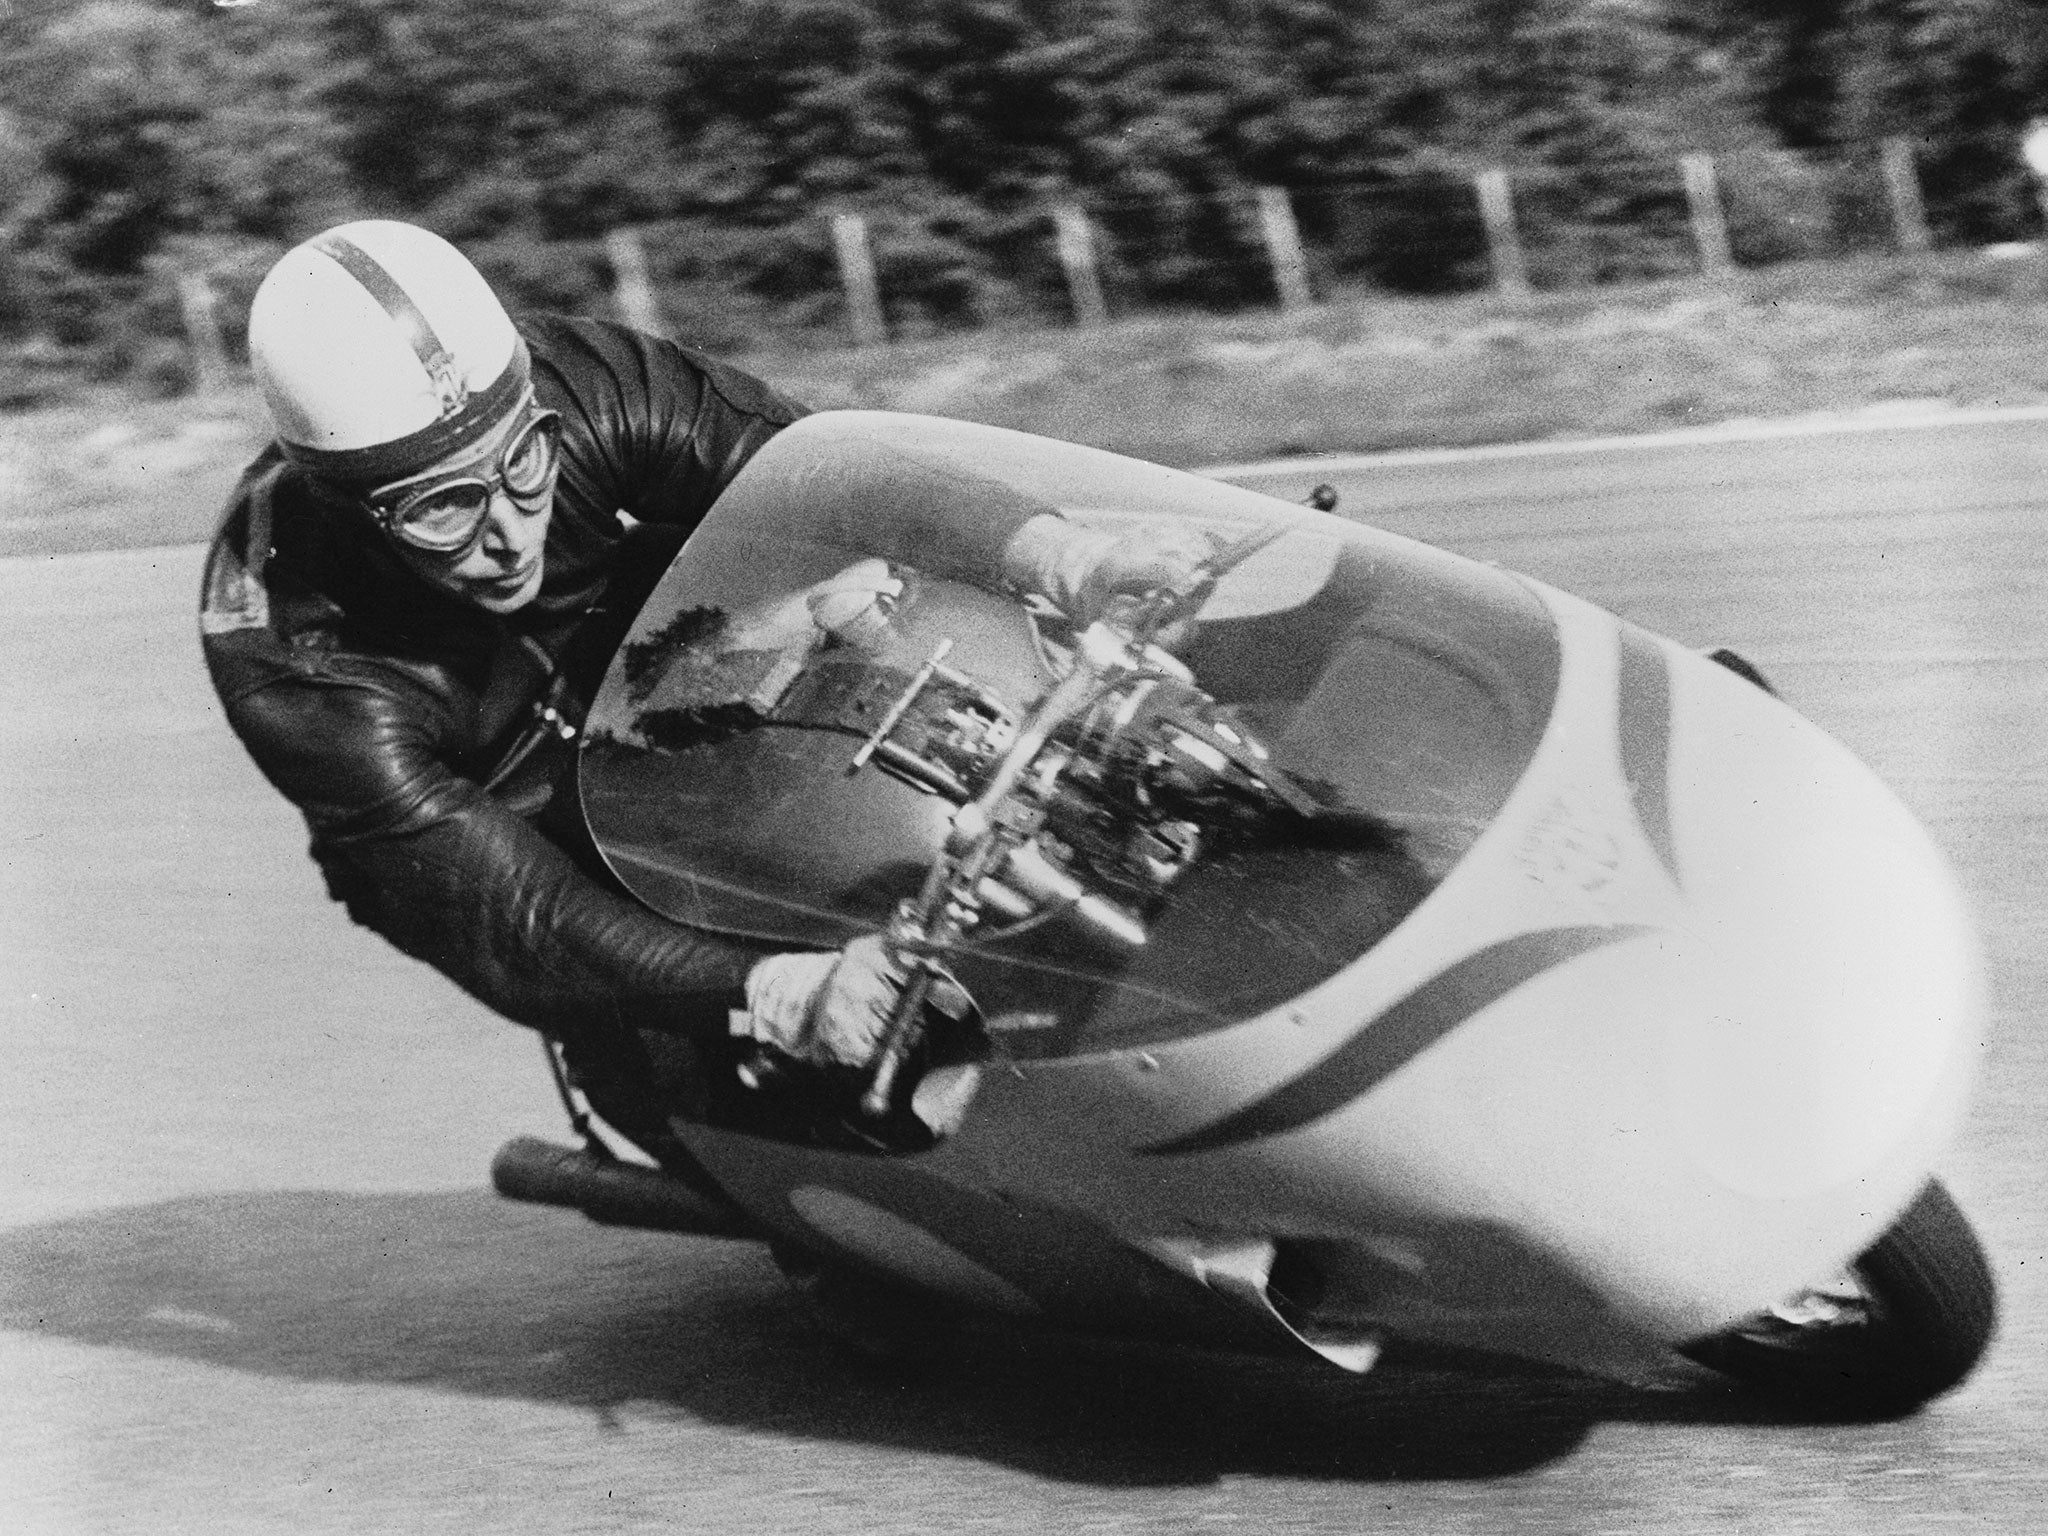 Surtees remains the only world champion on two and four wheels